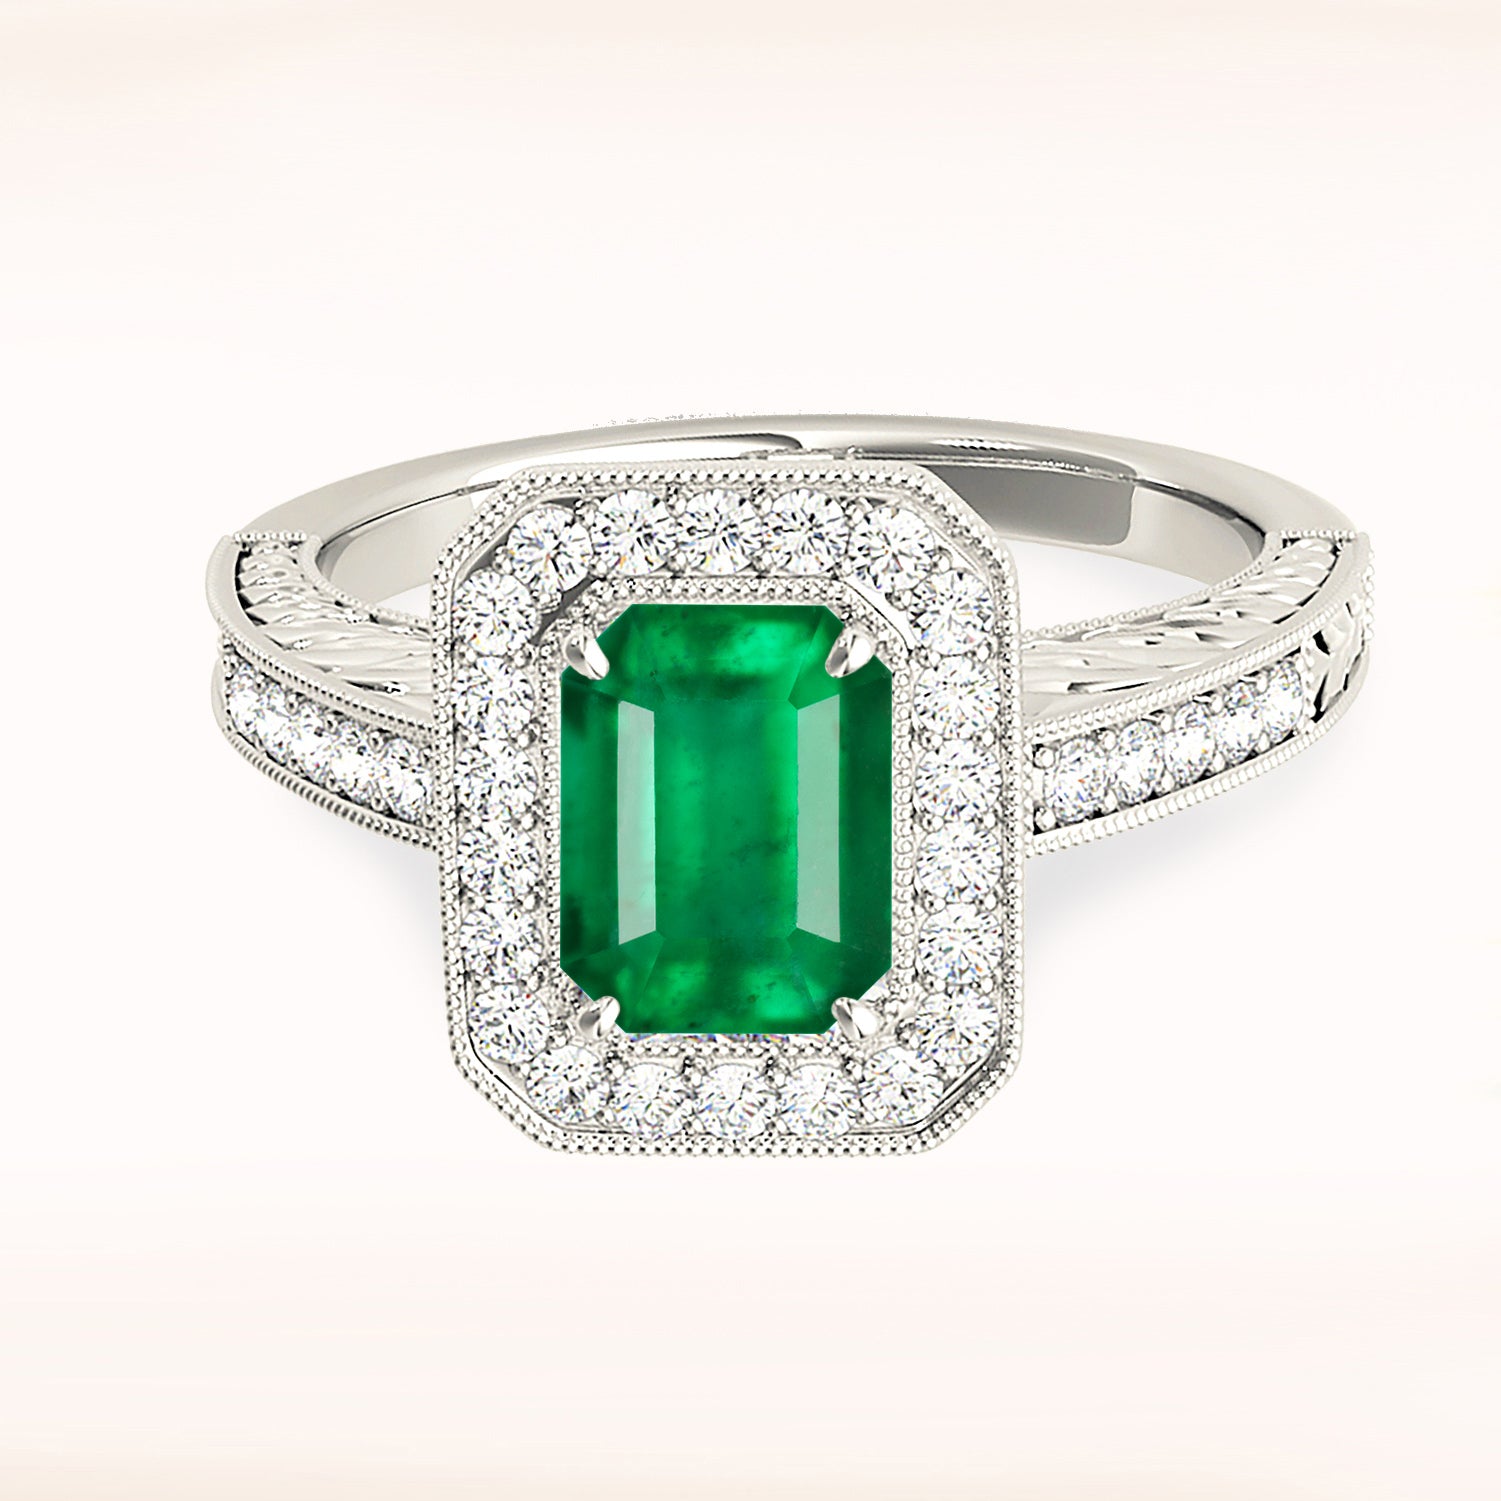 1.00 ct. Genuine Emerald Ring With 0.35 ctw. Channel Set Diamond Halo and Diamond Thin Shank-in 14K/18K White, Yellow, Rose Gold and Platinum - Christmas Jewelry Gift -VIRABYANI